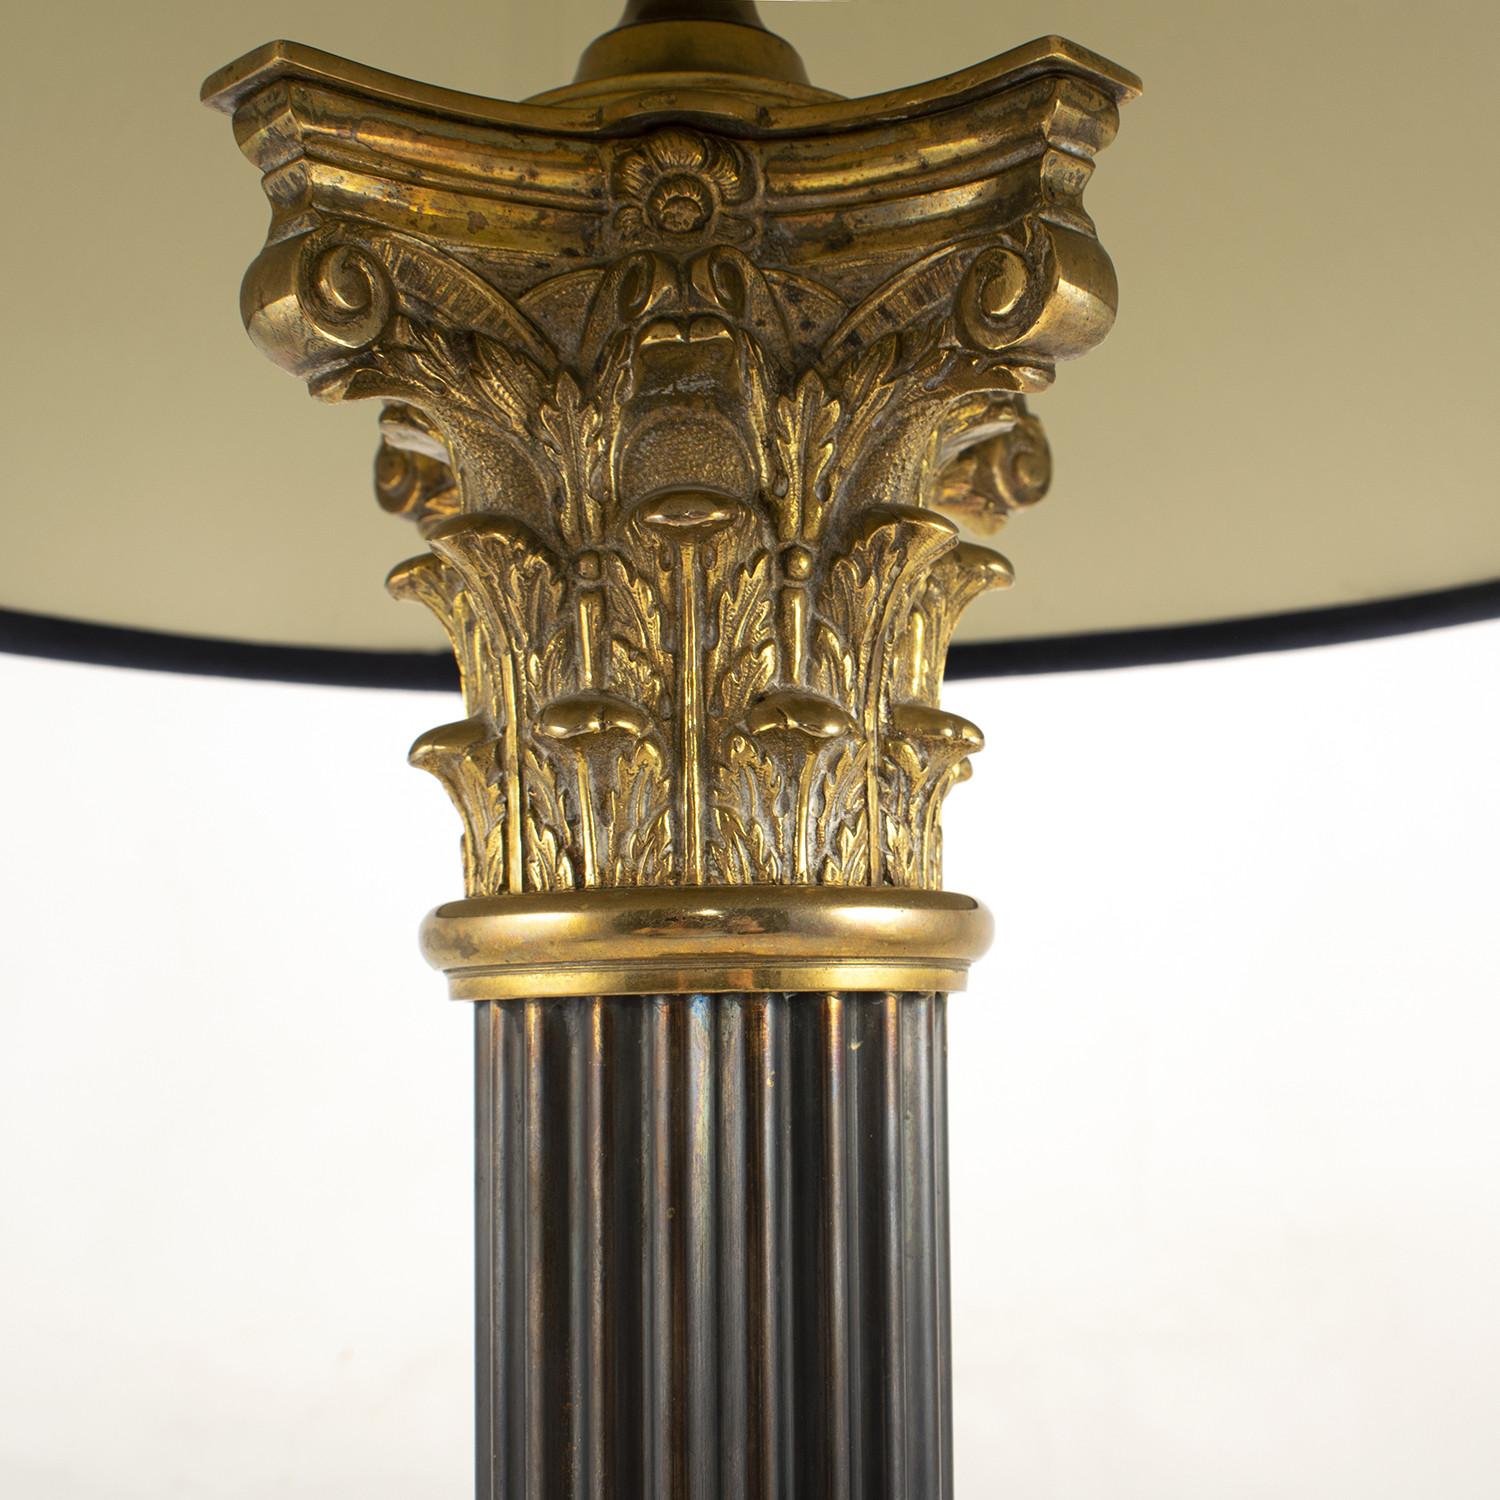 French table lamp I patinated and gilt bronze. Ormolu capitals above fluted stem, raised on stepped square base.
Louis XVI style, France 1860-1870 (Napoleon III).
Measures: Height to socket 62 cm. Height with shade 88 cm.
Price incl. shade